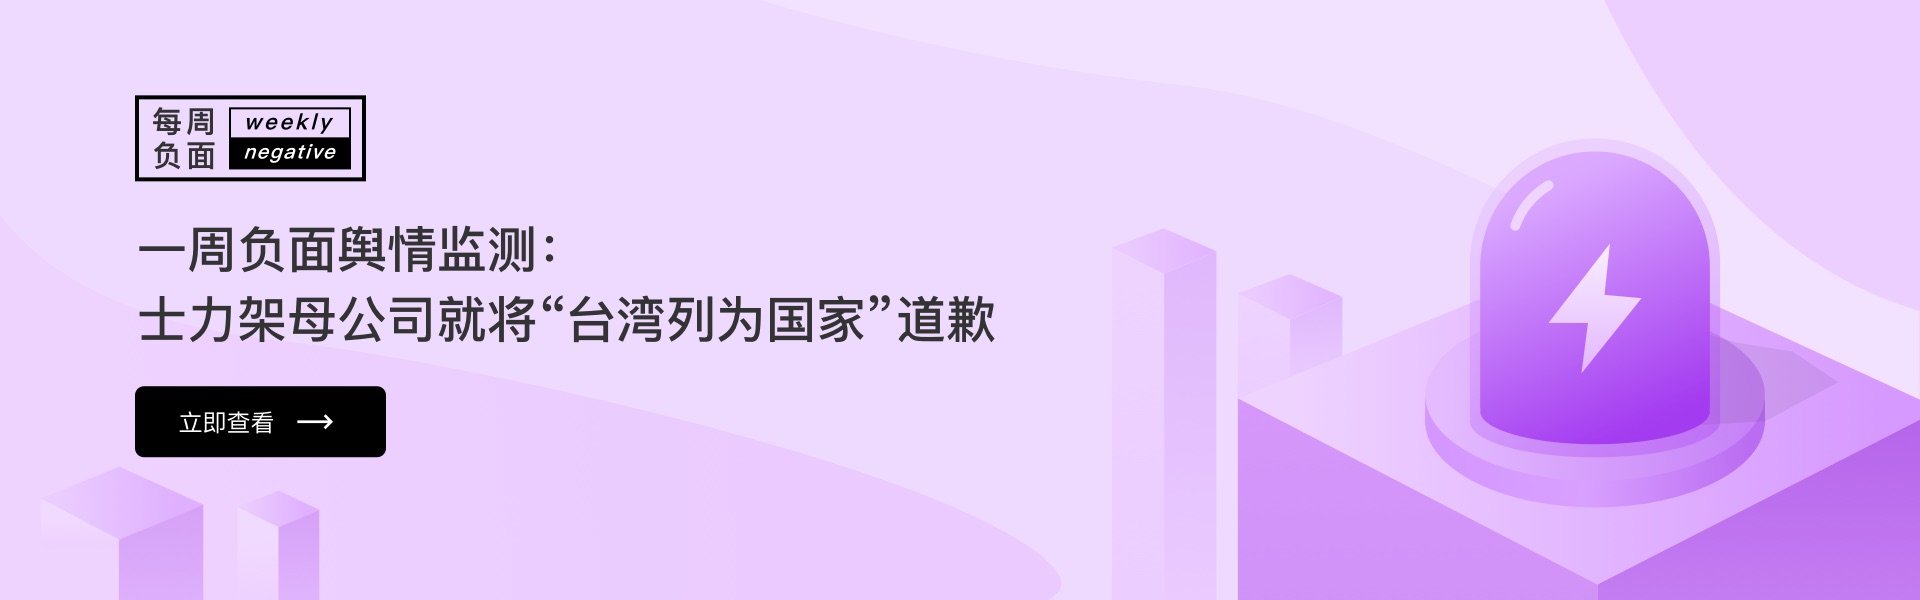 mohodata官网首页轮播banner2